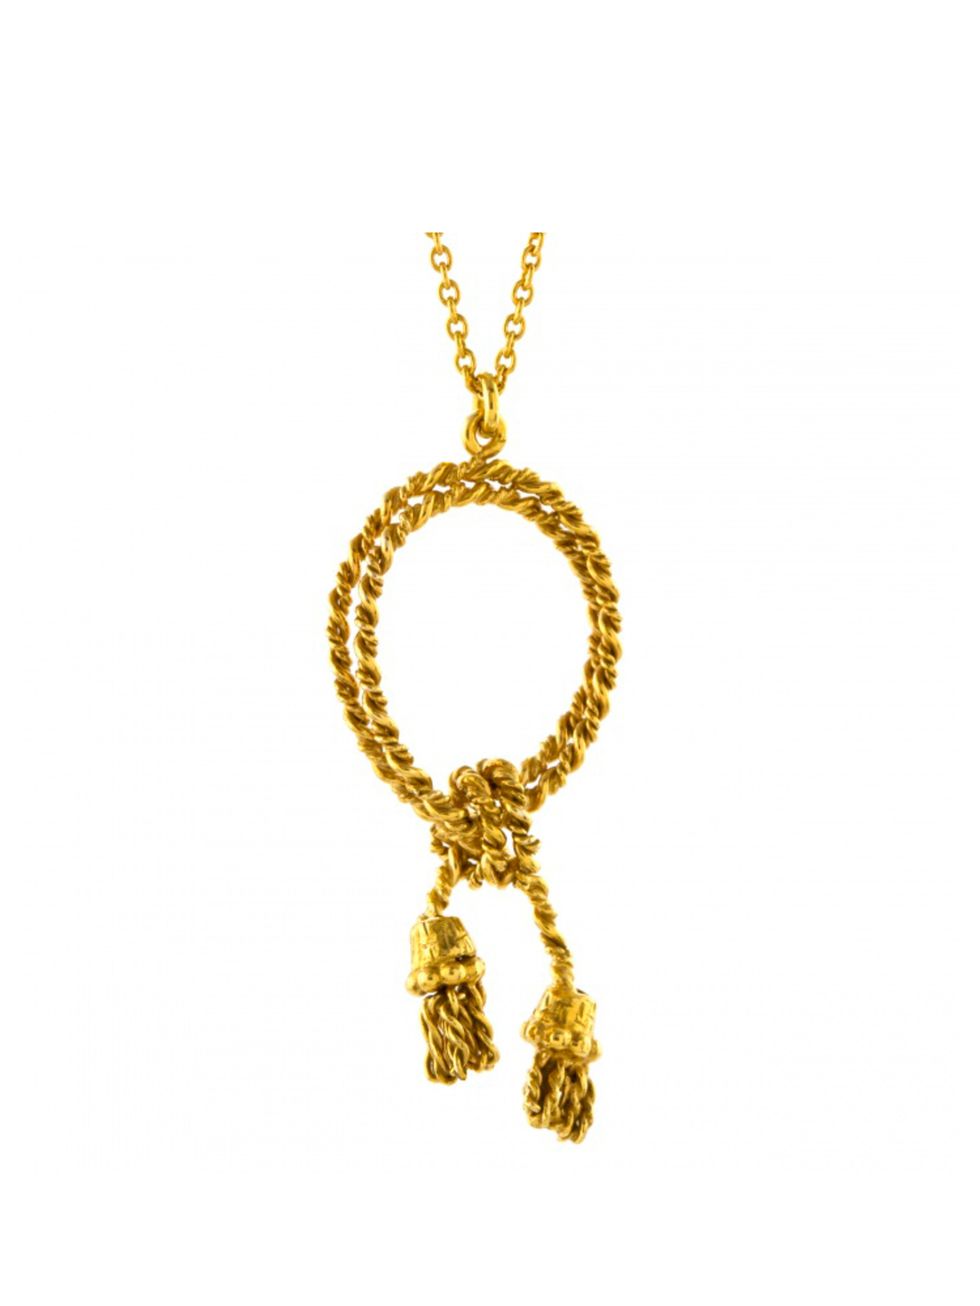 <p>Fashion Assistant Billie Bhatia will be wearing this necklace all weekend with an off the shoulder dress (and feeling pretty regal)</p>

<p> </p>

<p>Alex Monroe for Buckingham Palace Necklace, £174 @ <a href="http://www.royalcollectionshop.co.uk/jewel